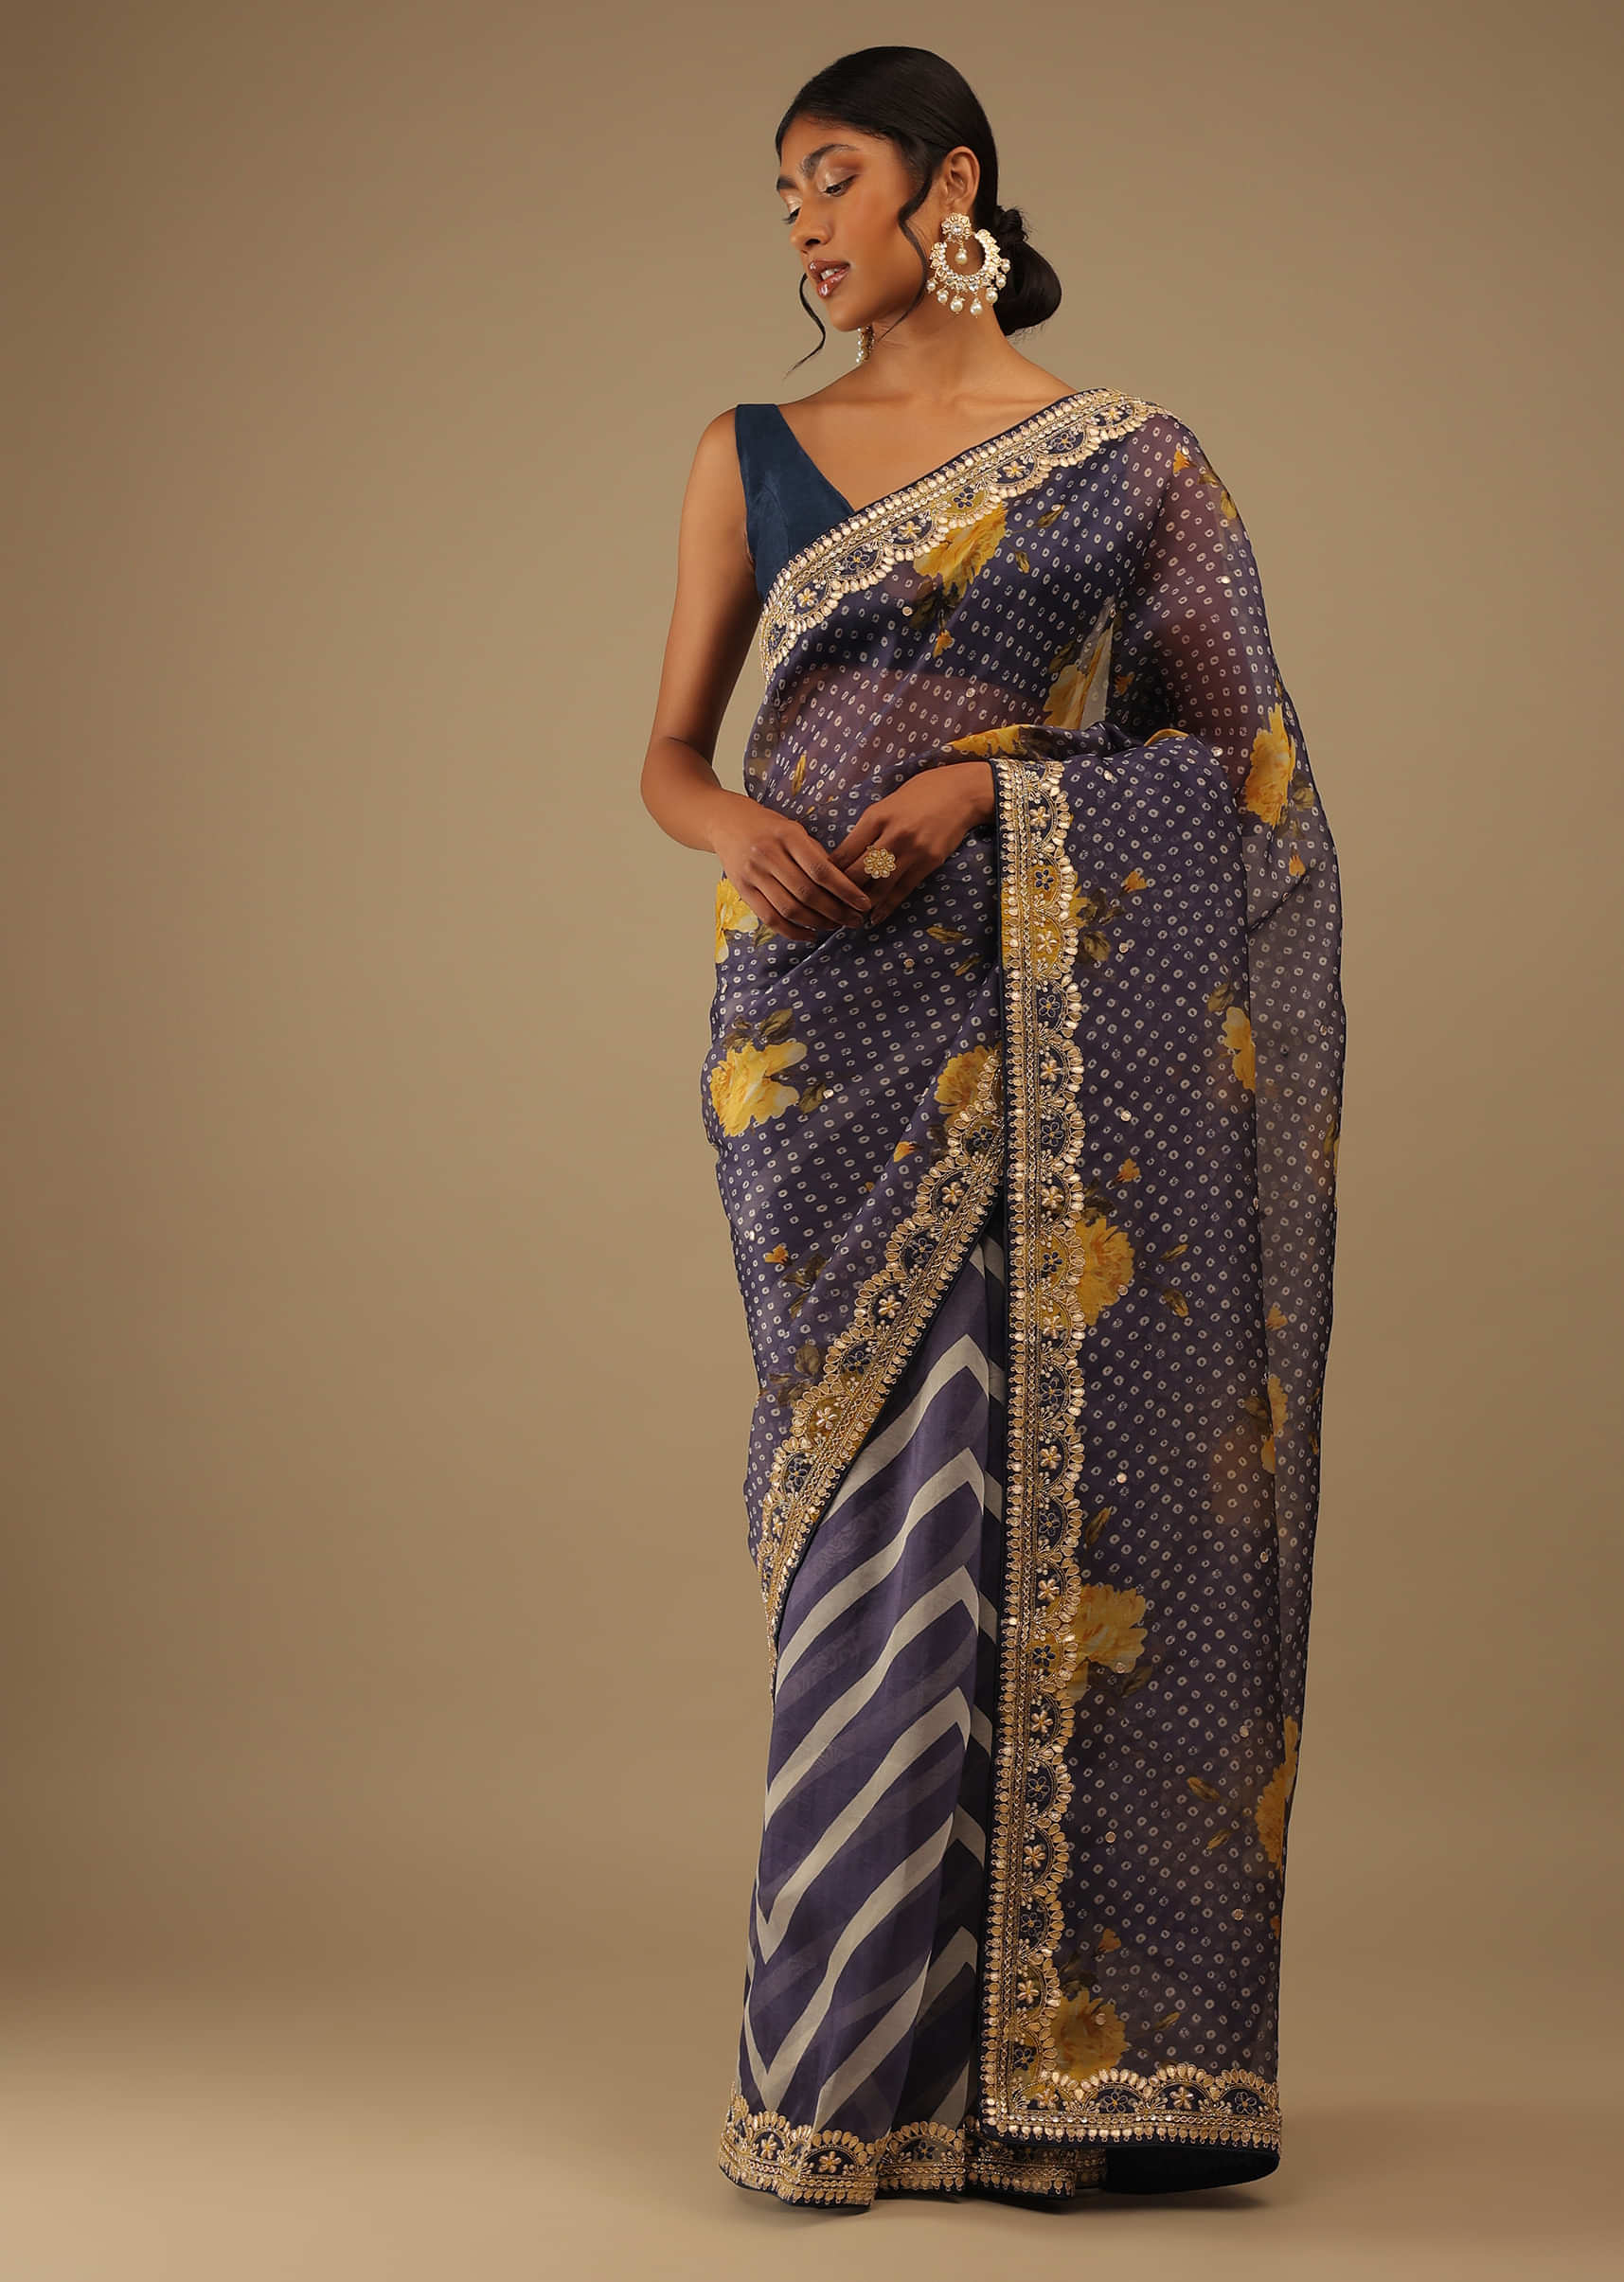 Eclipse Blue Saree In Digital Bandhani And Floral Print, Crafted In Silk With Gotta Patti Embroidery Buttis